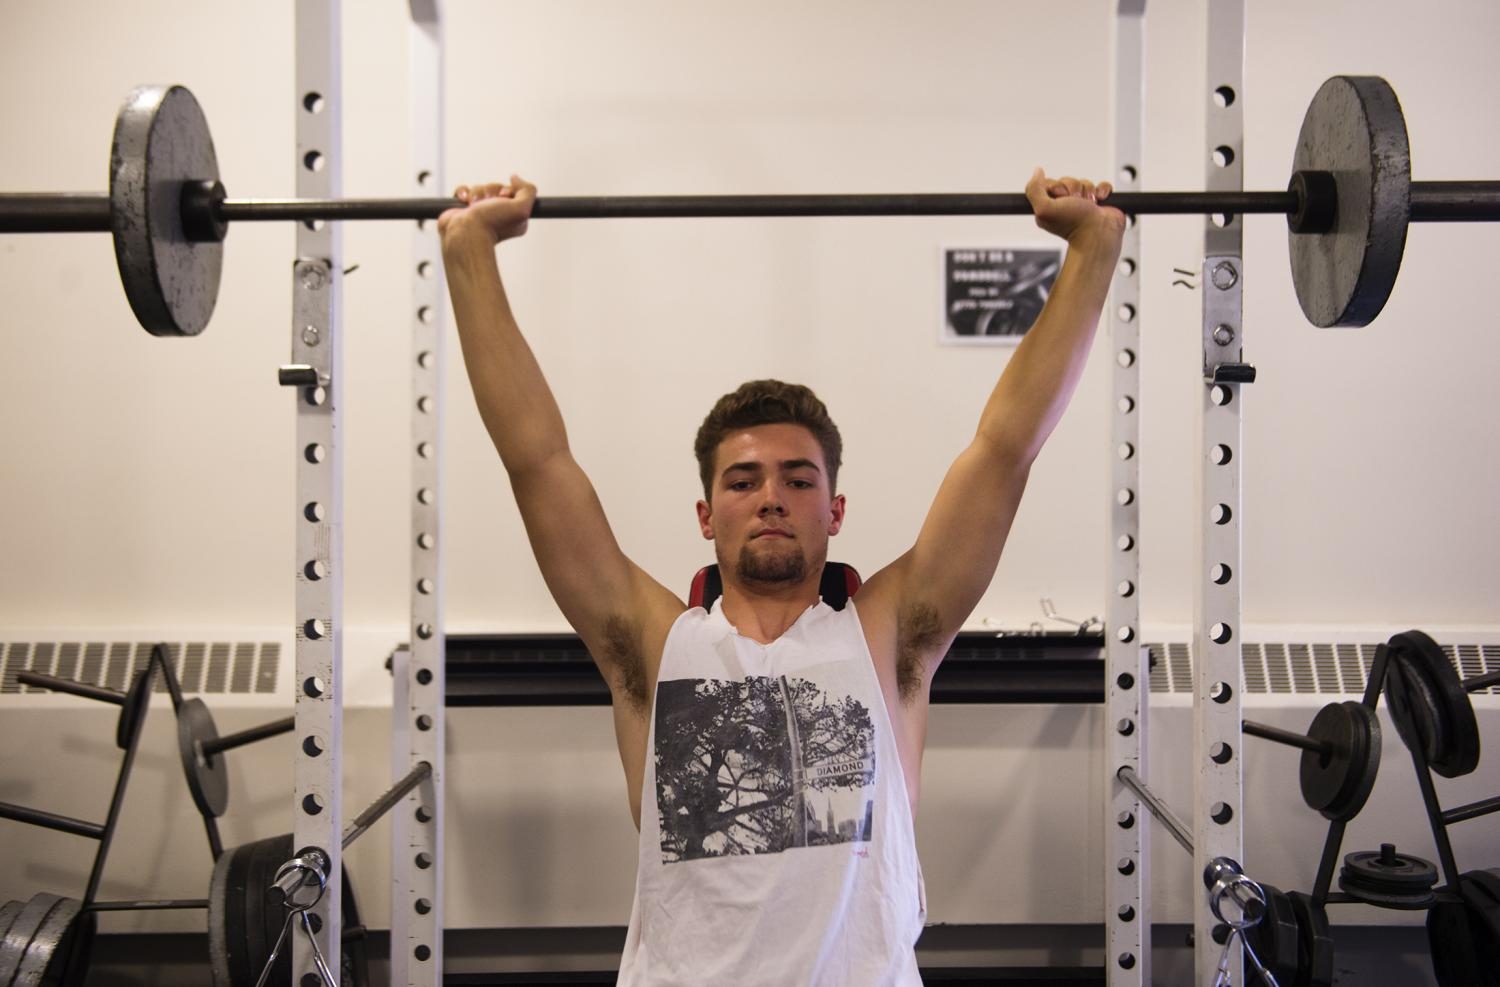 Freshman architecture studies major Nicholas Heay works out regularly and likes to target areas that need improvement.